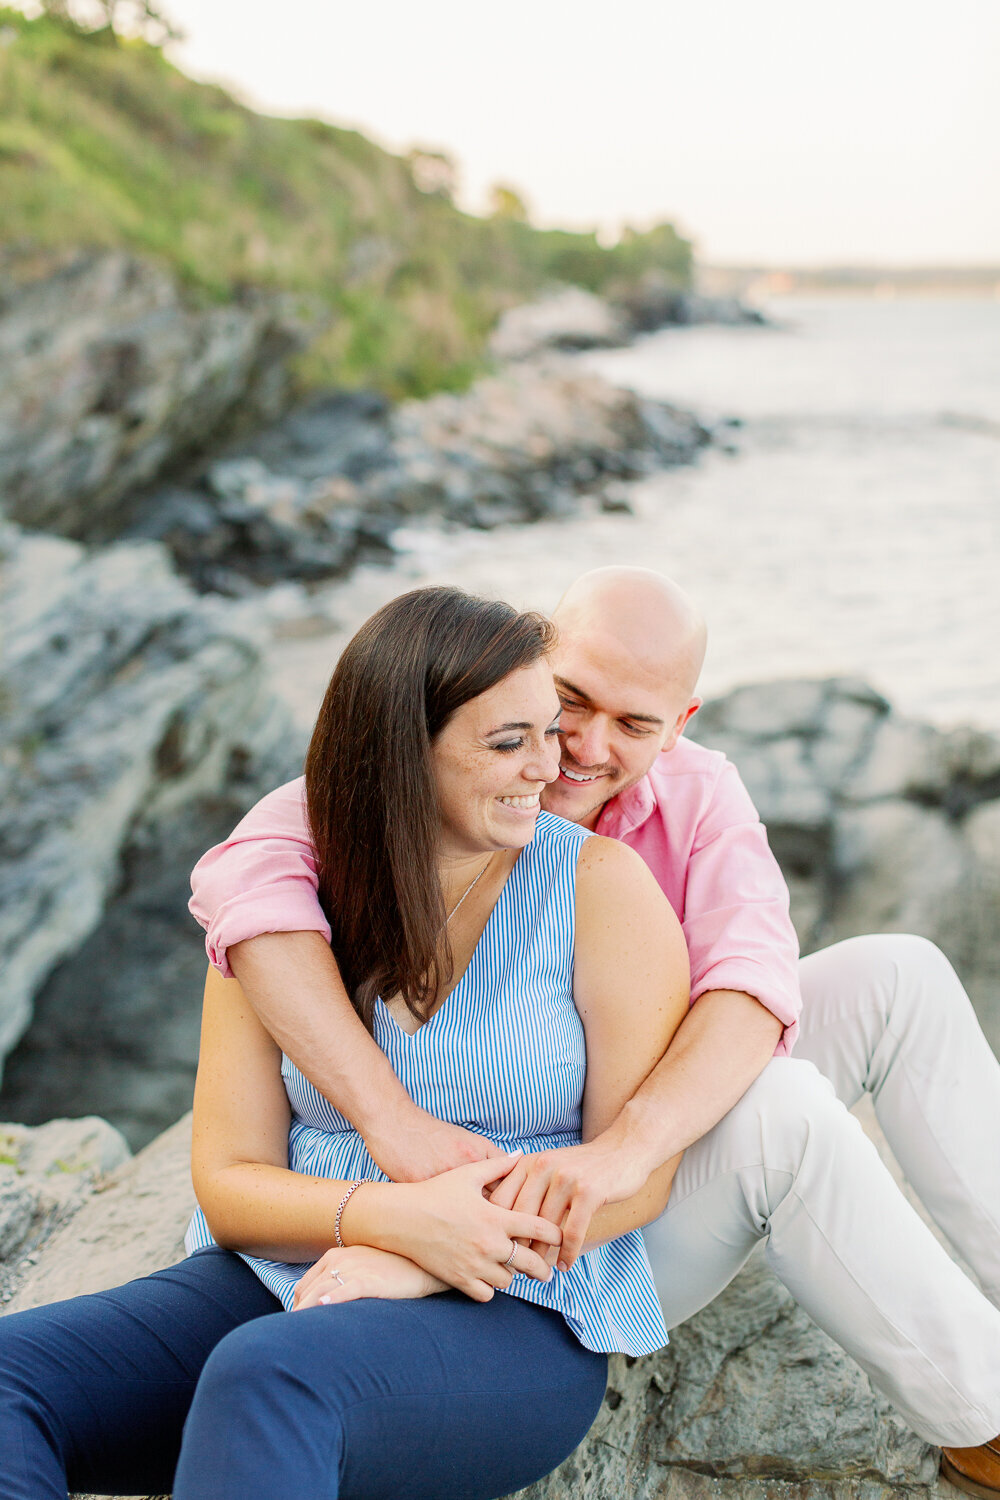 Couple sitting on rocks by the water with their arms around each other.